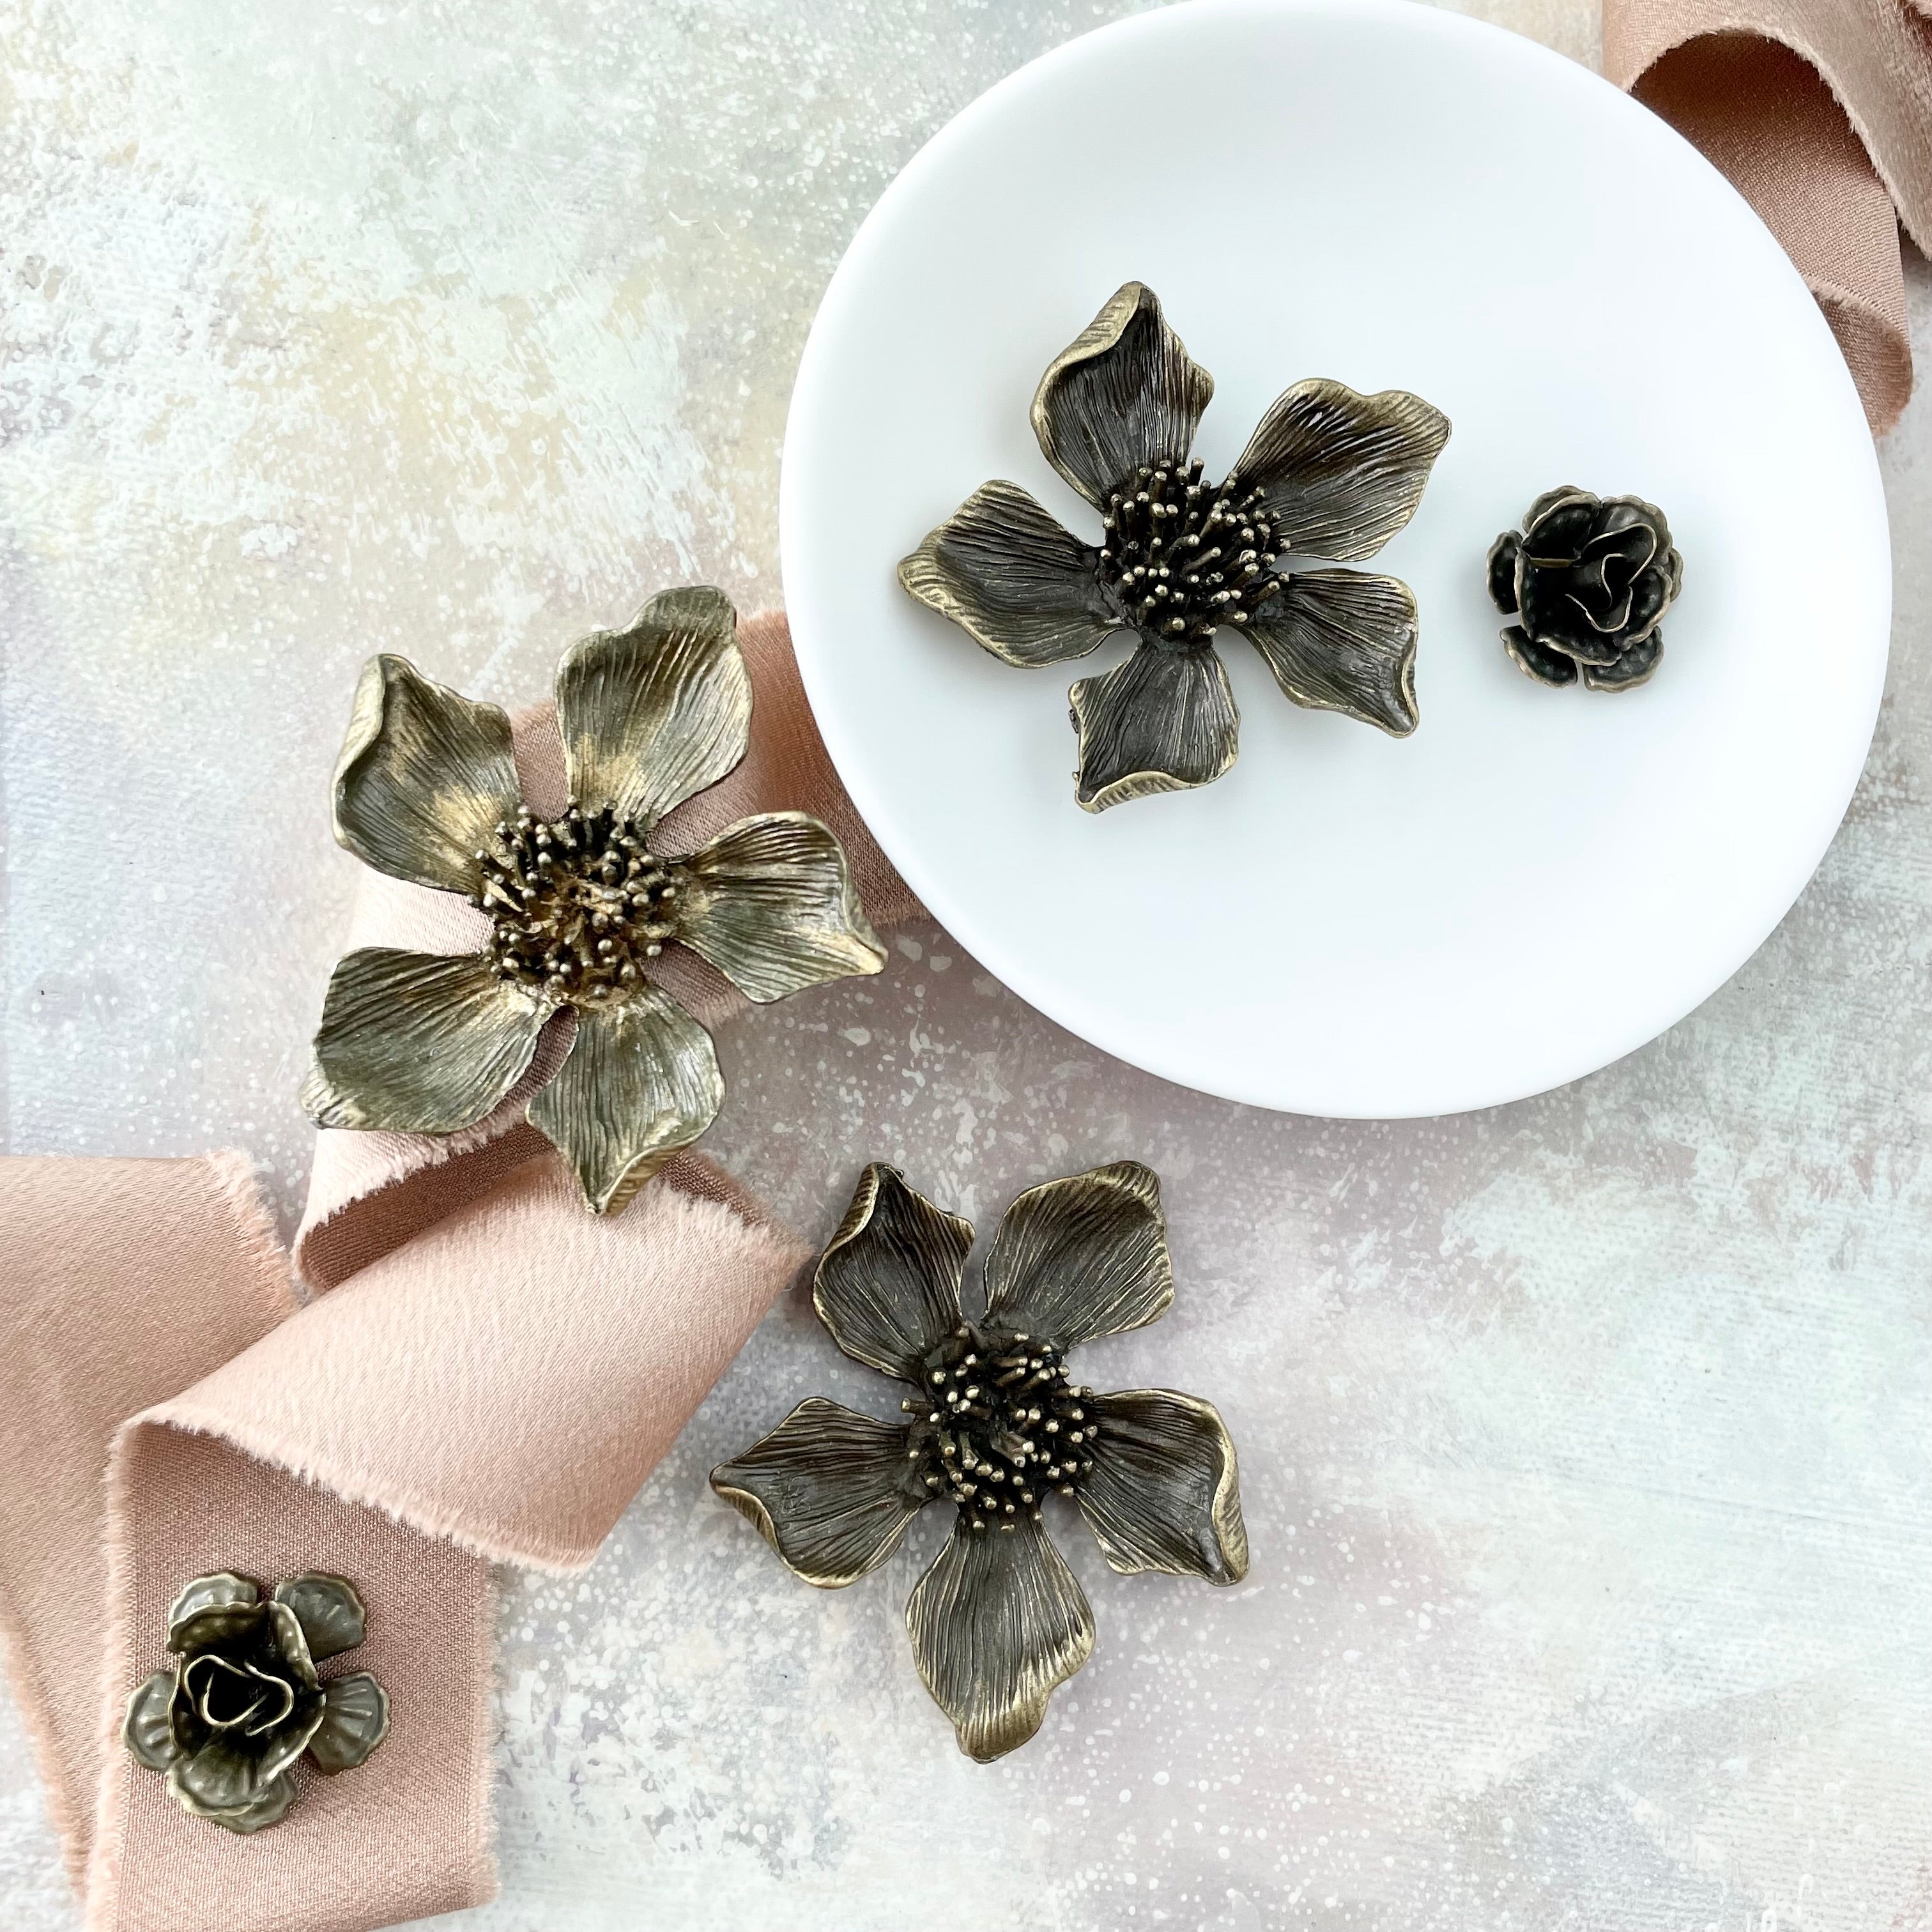  One large Metal styling flower and one small metal styling flower in white dish styled with tan ribbon and an additional three flowers - Flat lay props from Champagne & GRIT